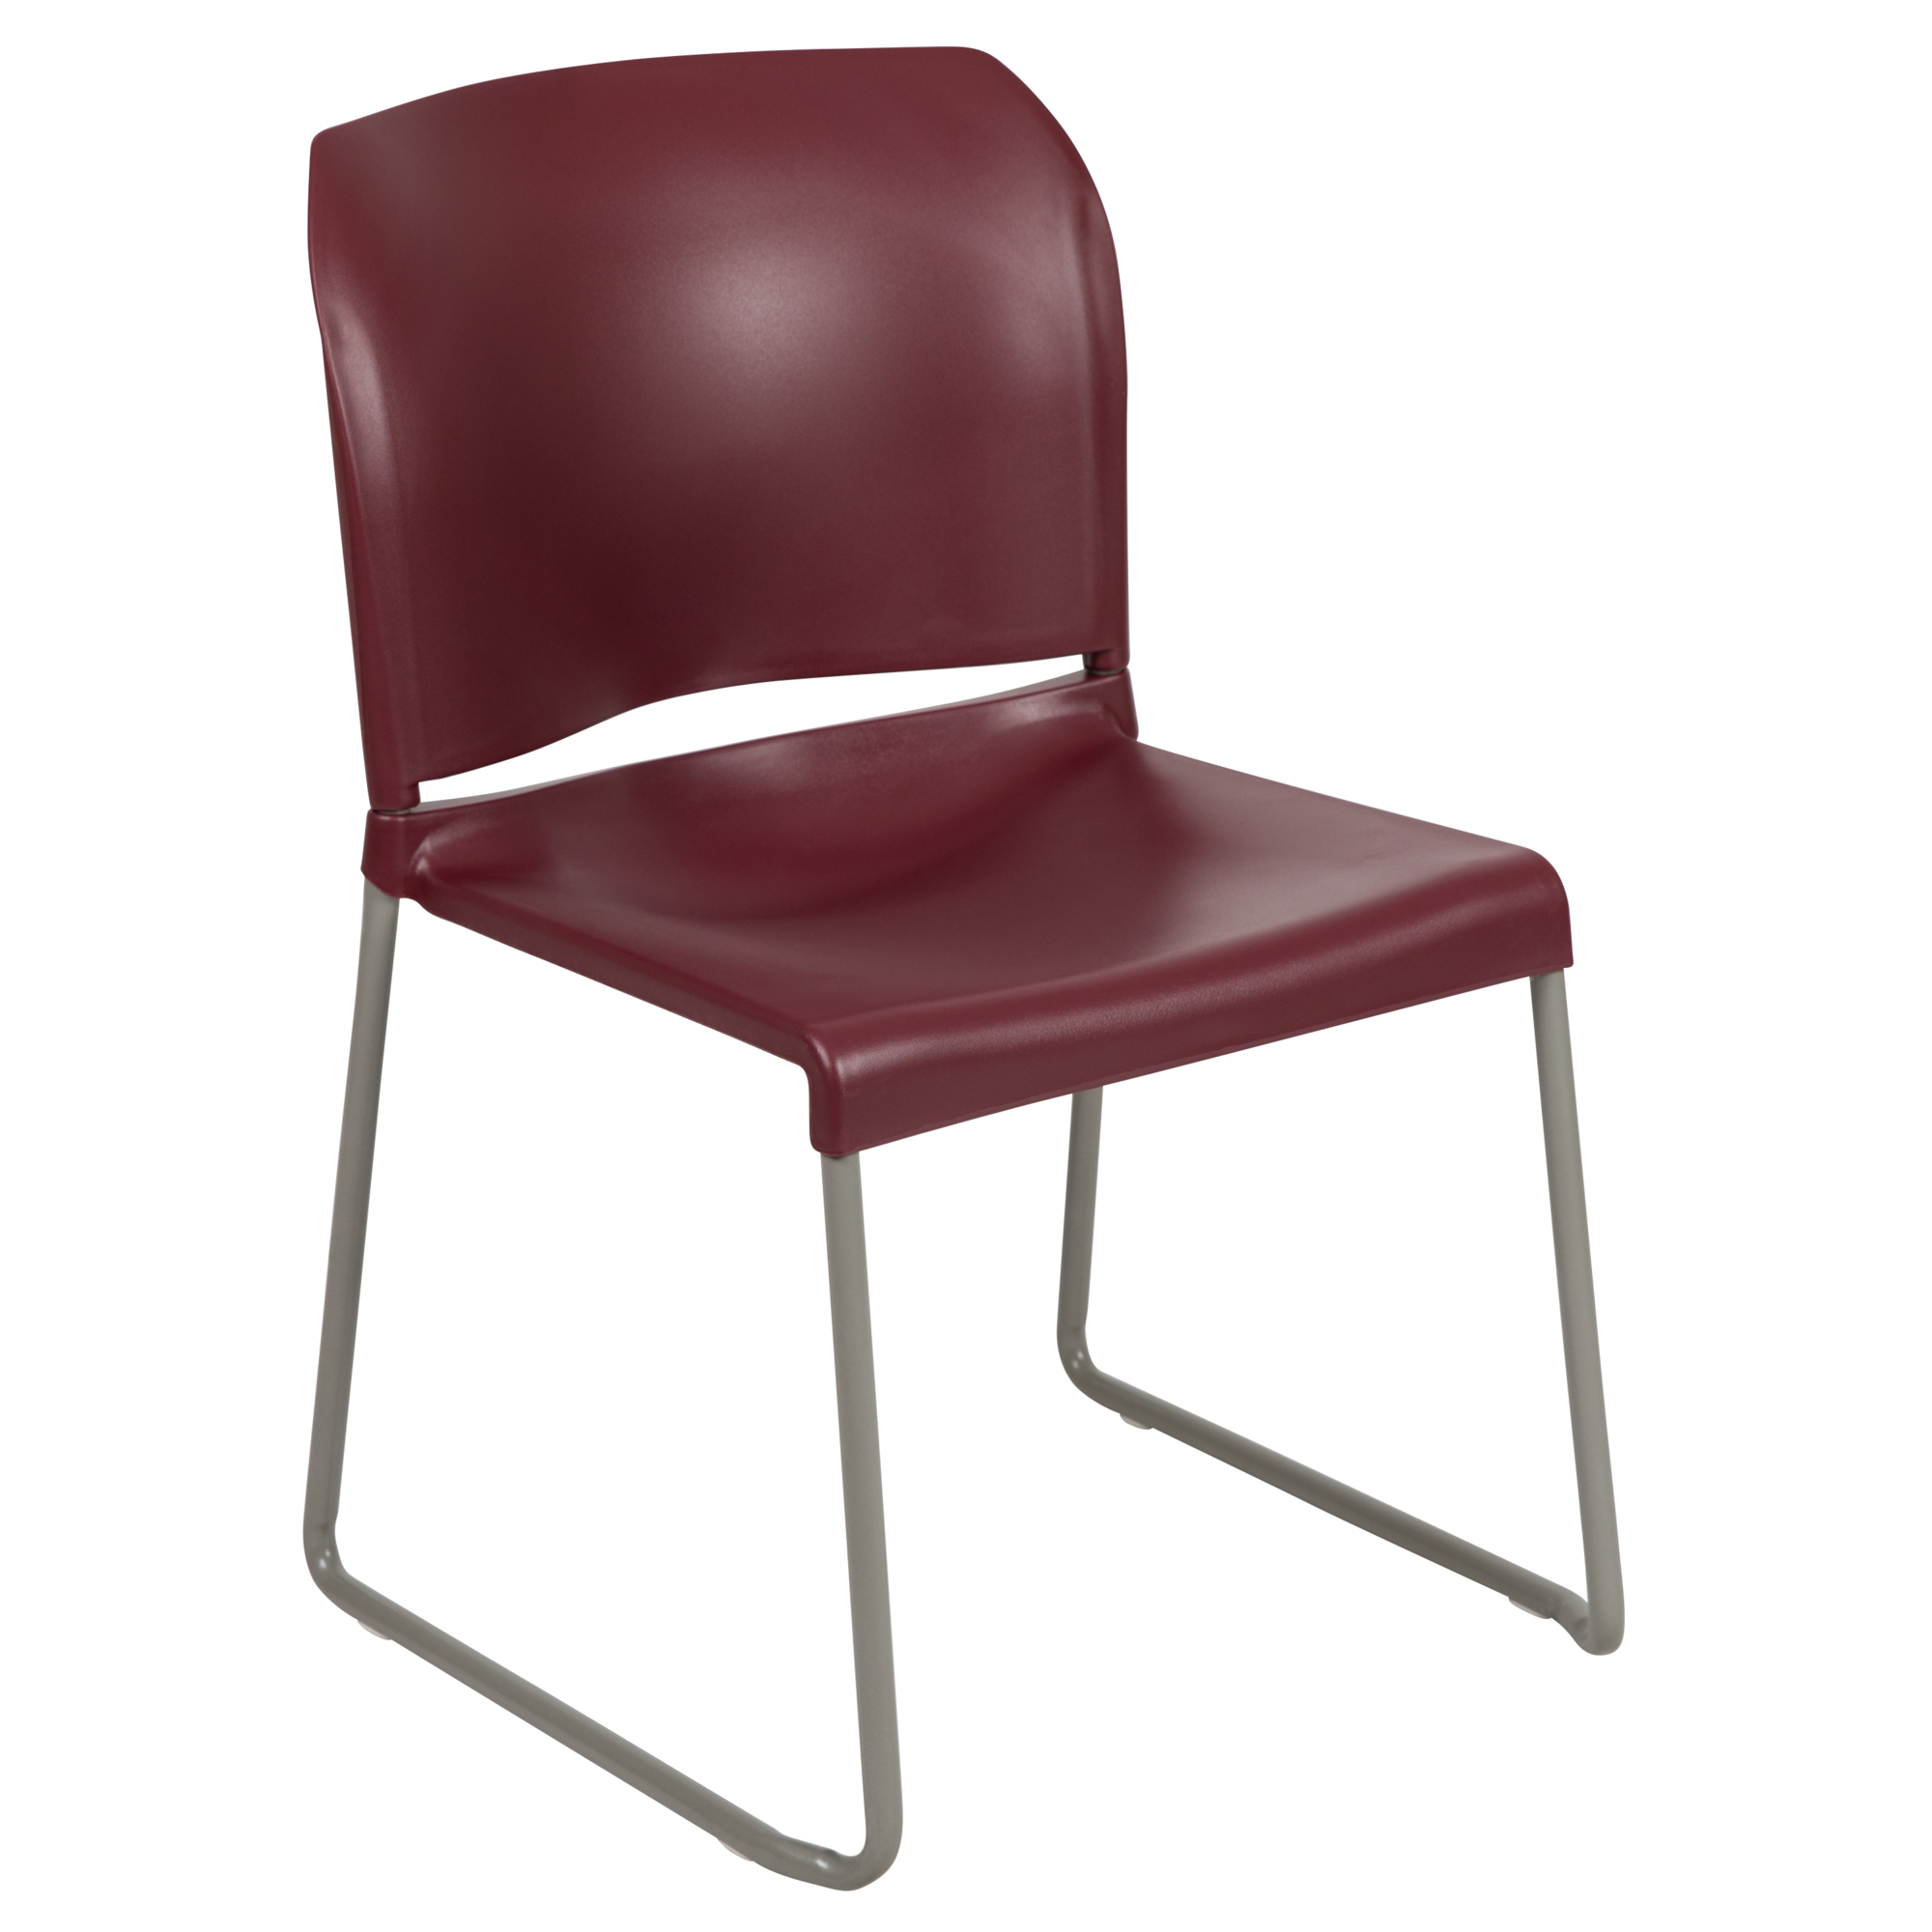 Flash Furniture, Burgundy Full Back Contoured Sled Base Stack Chair, Primary Color Burgundy, Included (qty.) 1, Model RUT238ABY